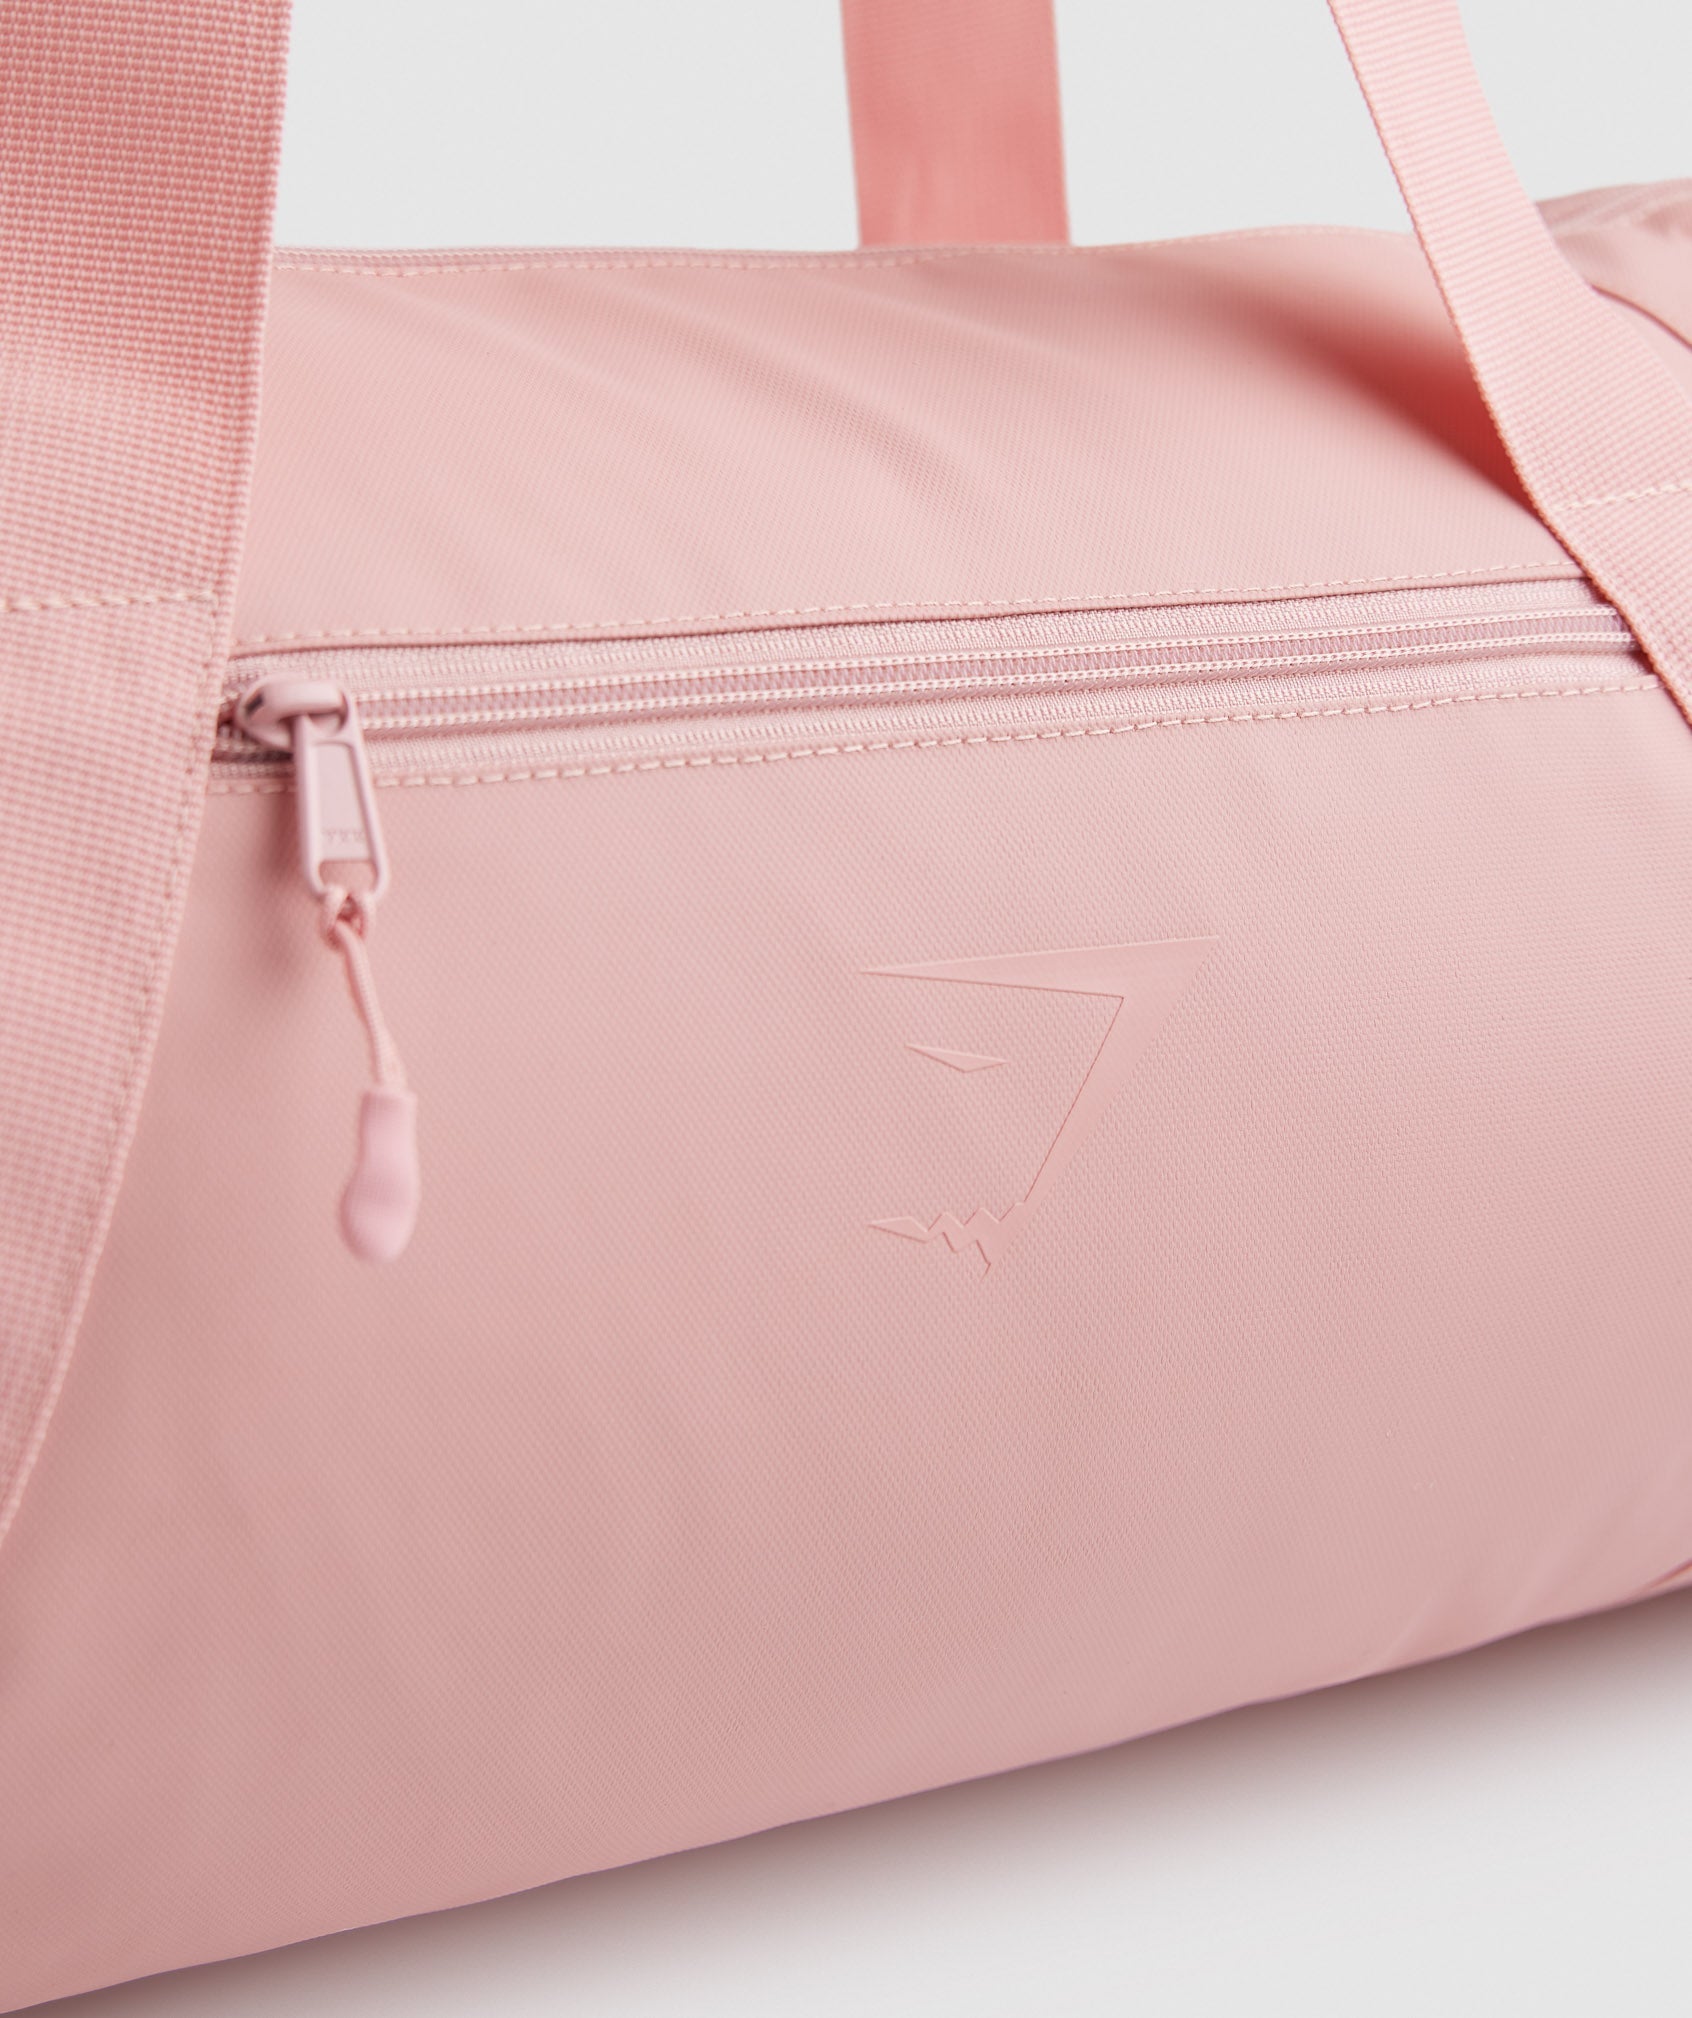 Barrel Bag in Paige Pink - view 3